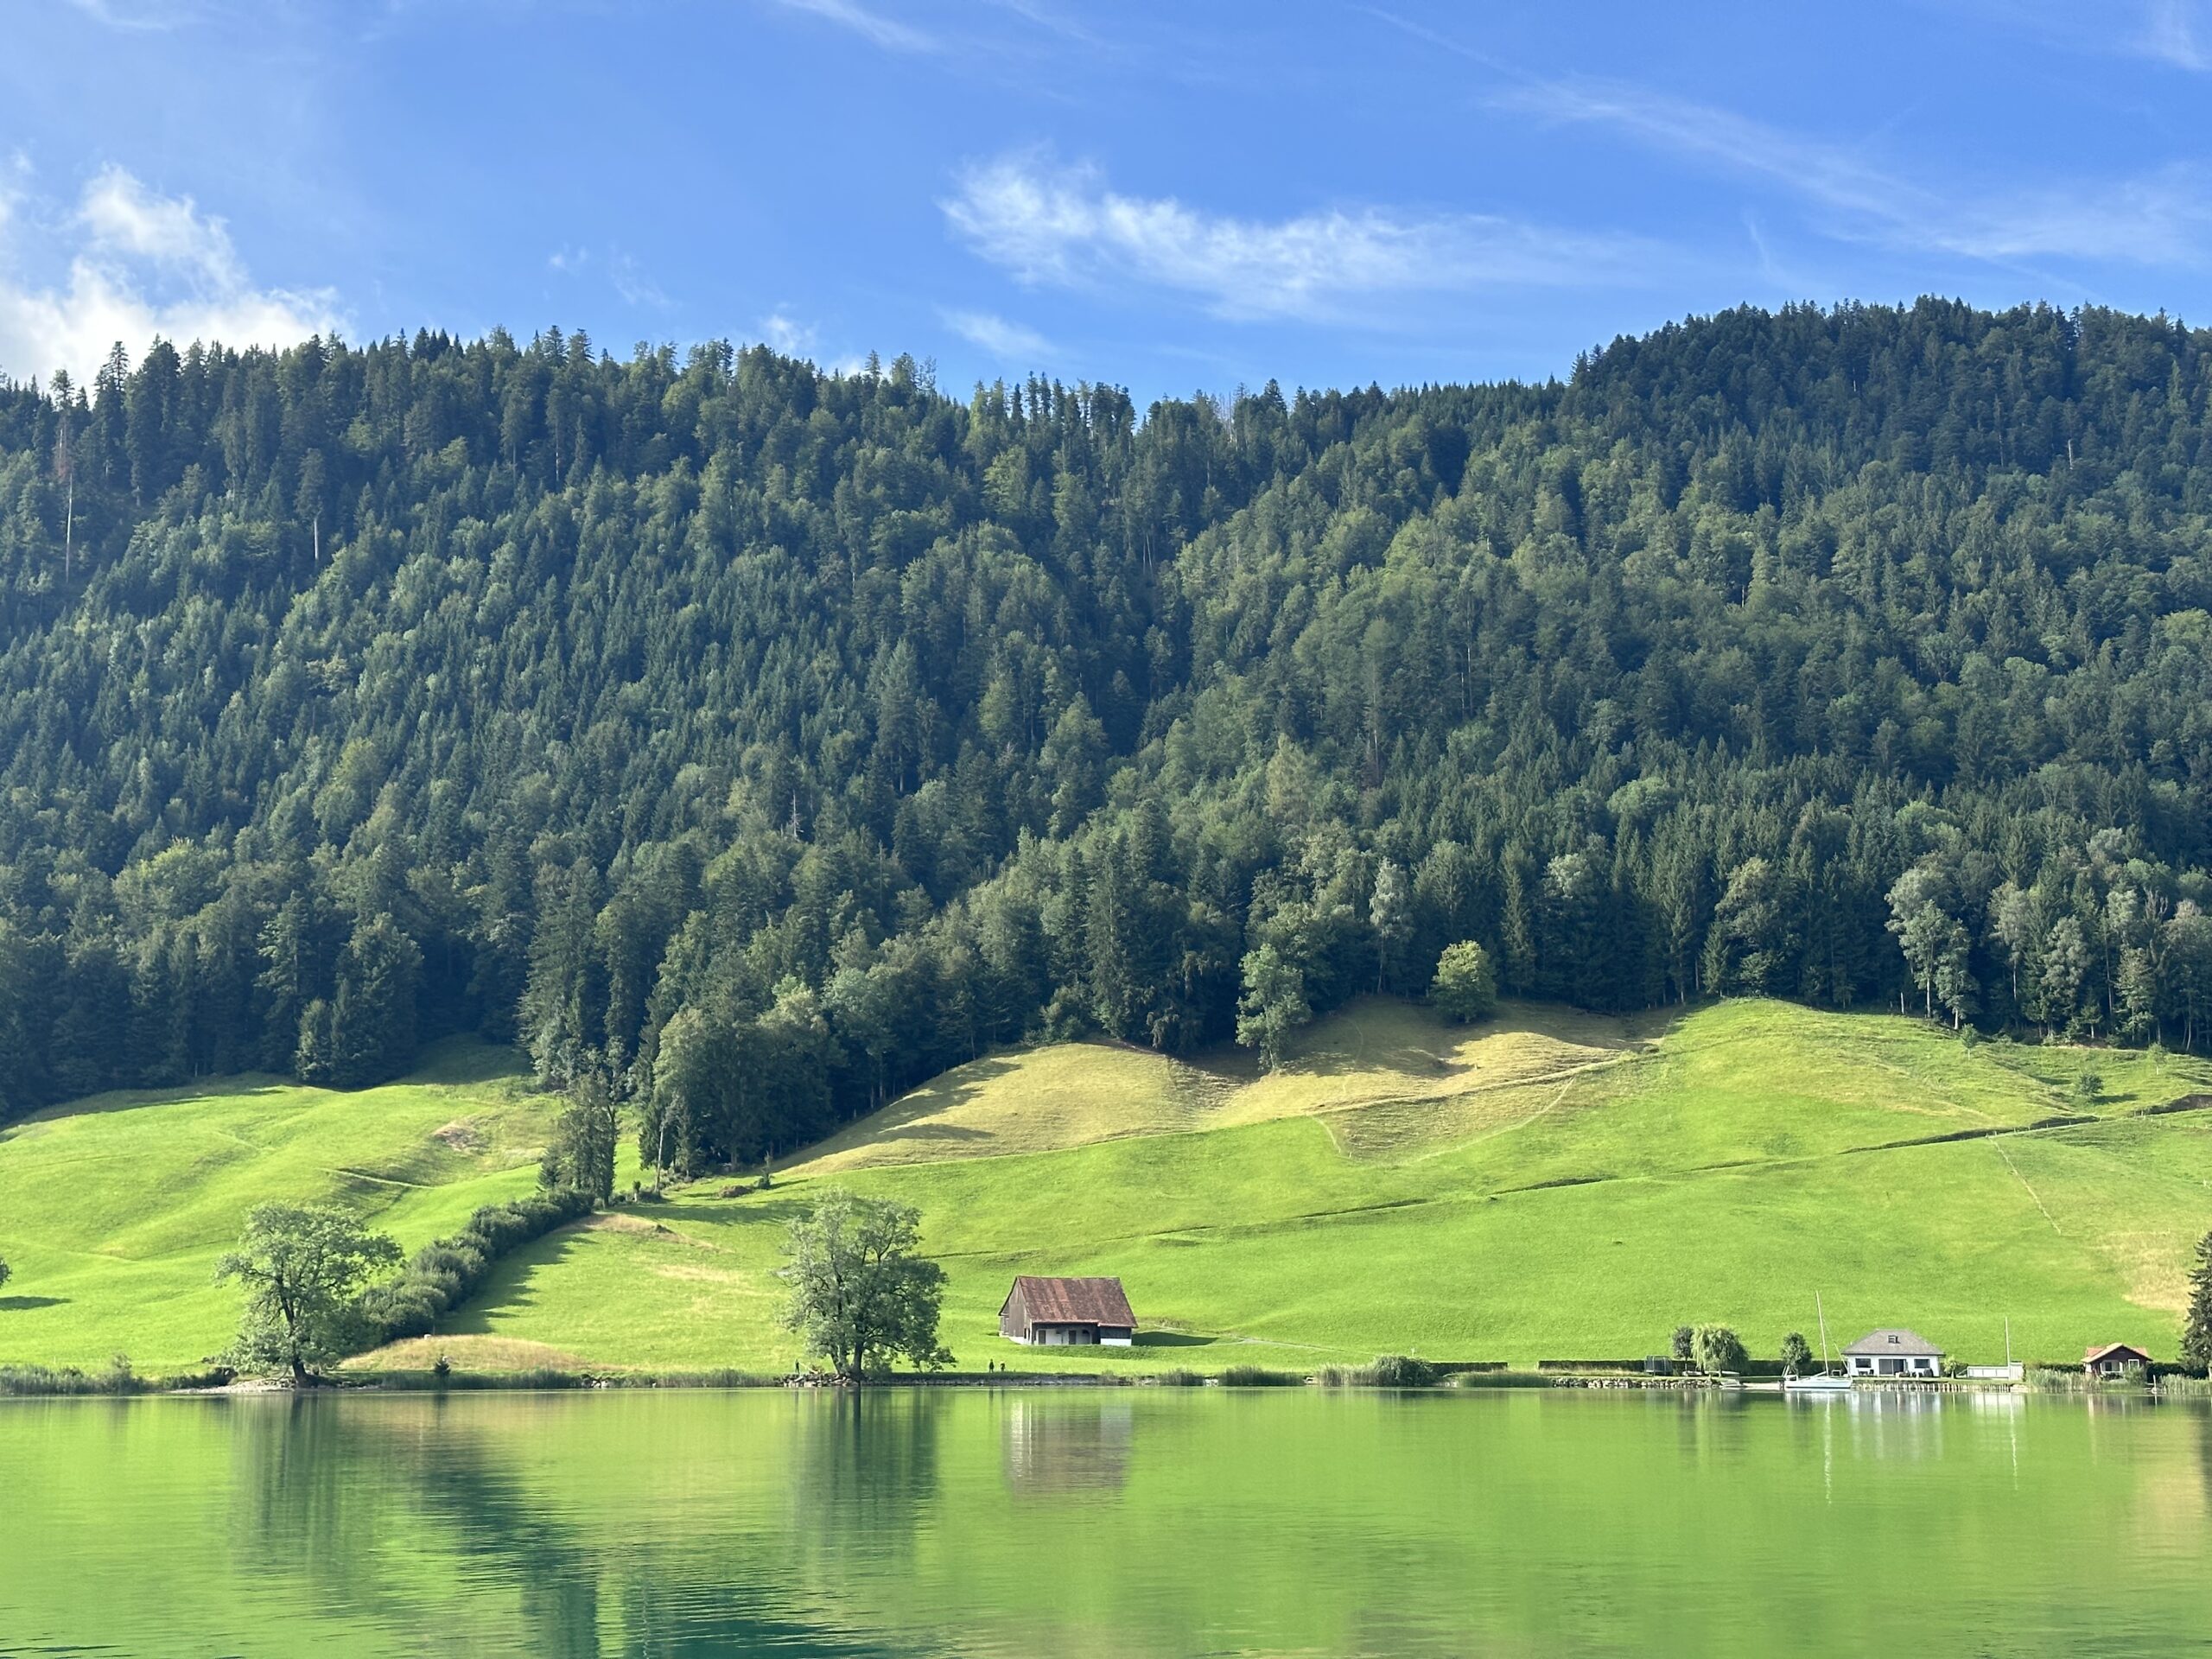 Landscape view with lake in foreground, green hilly pastures and forested hills in the background against a blue sky with a few white clouds.